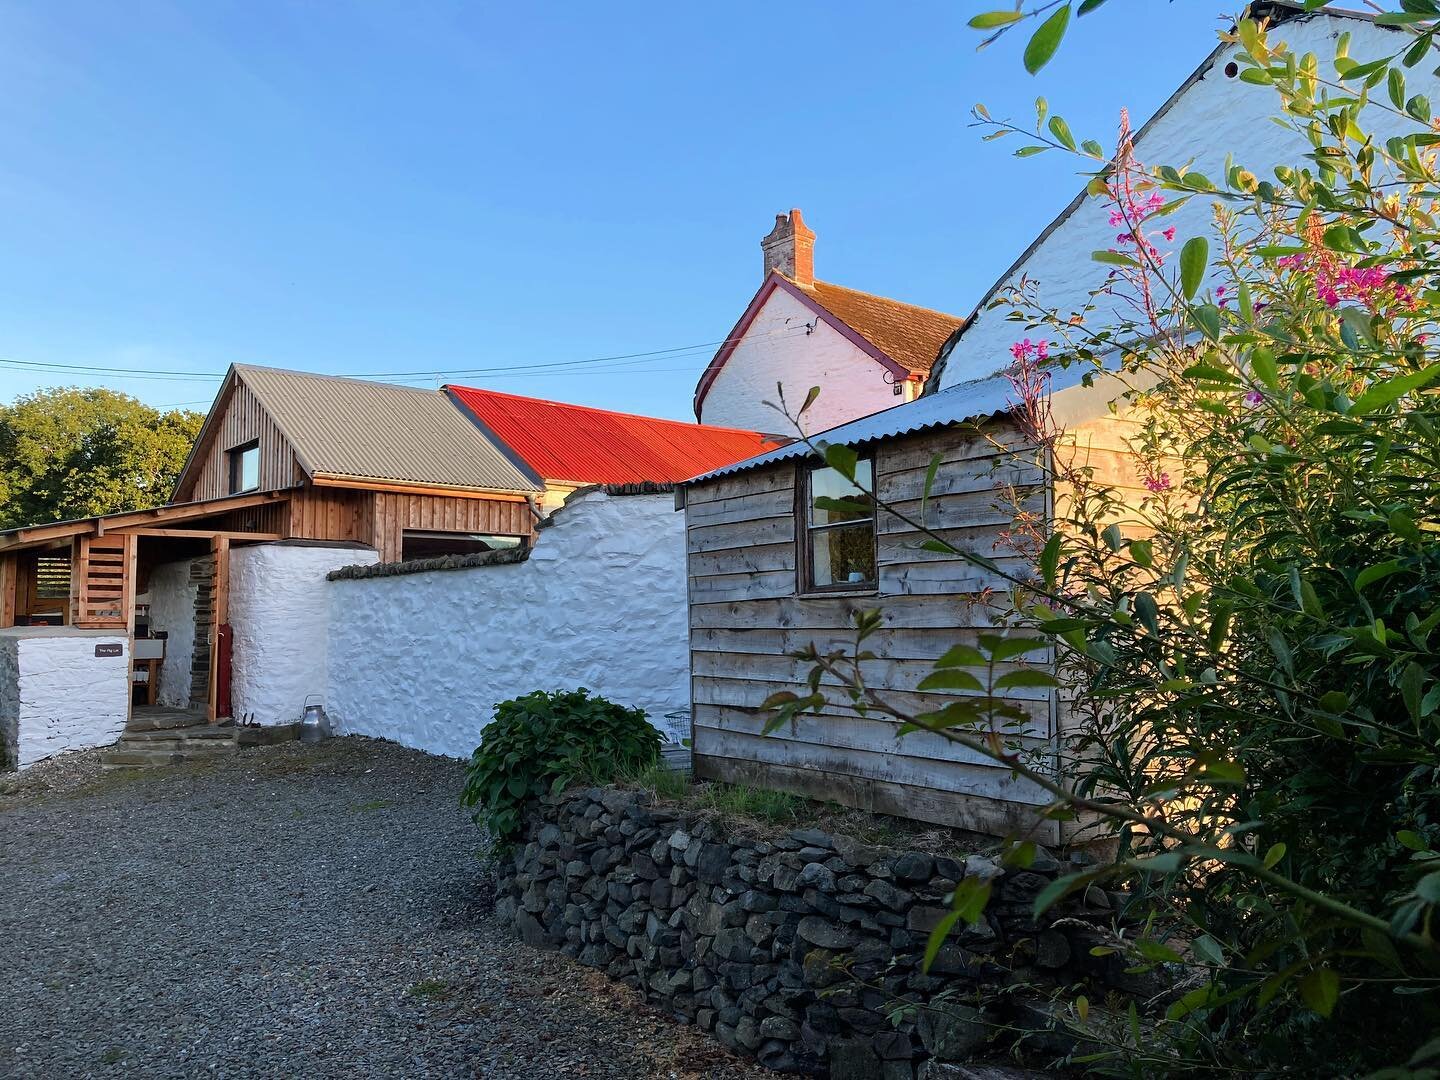 A multitude of colours and materials mingling happily together in the summer sun!

#farmitecture 
 #cabins #barns #holidayaccommodation #westwales #aberaeron #visitaberaeron #cardiganbay #aeronvalley #escapethecity #cabinlife